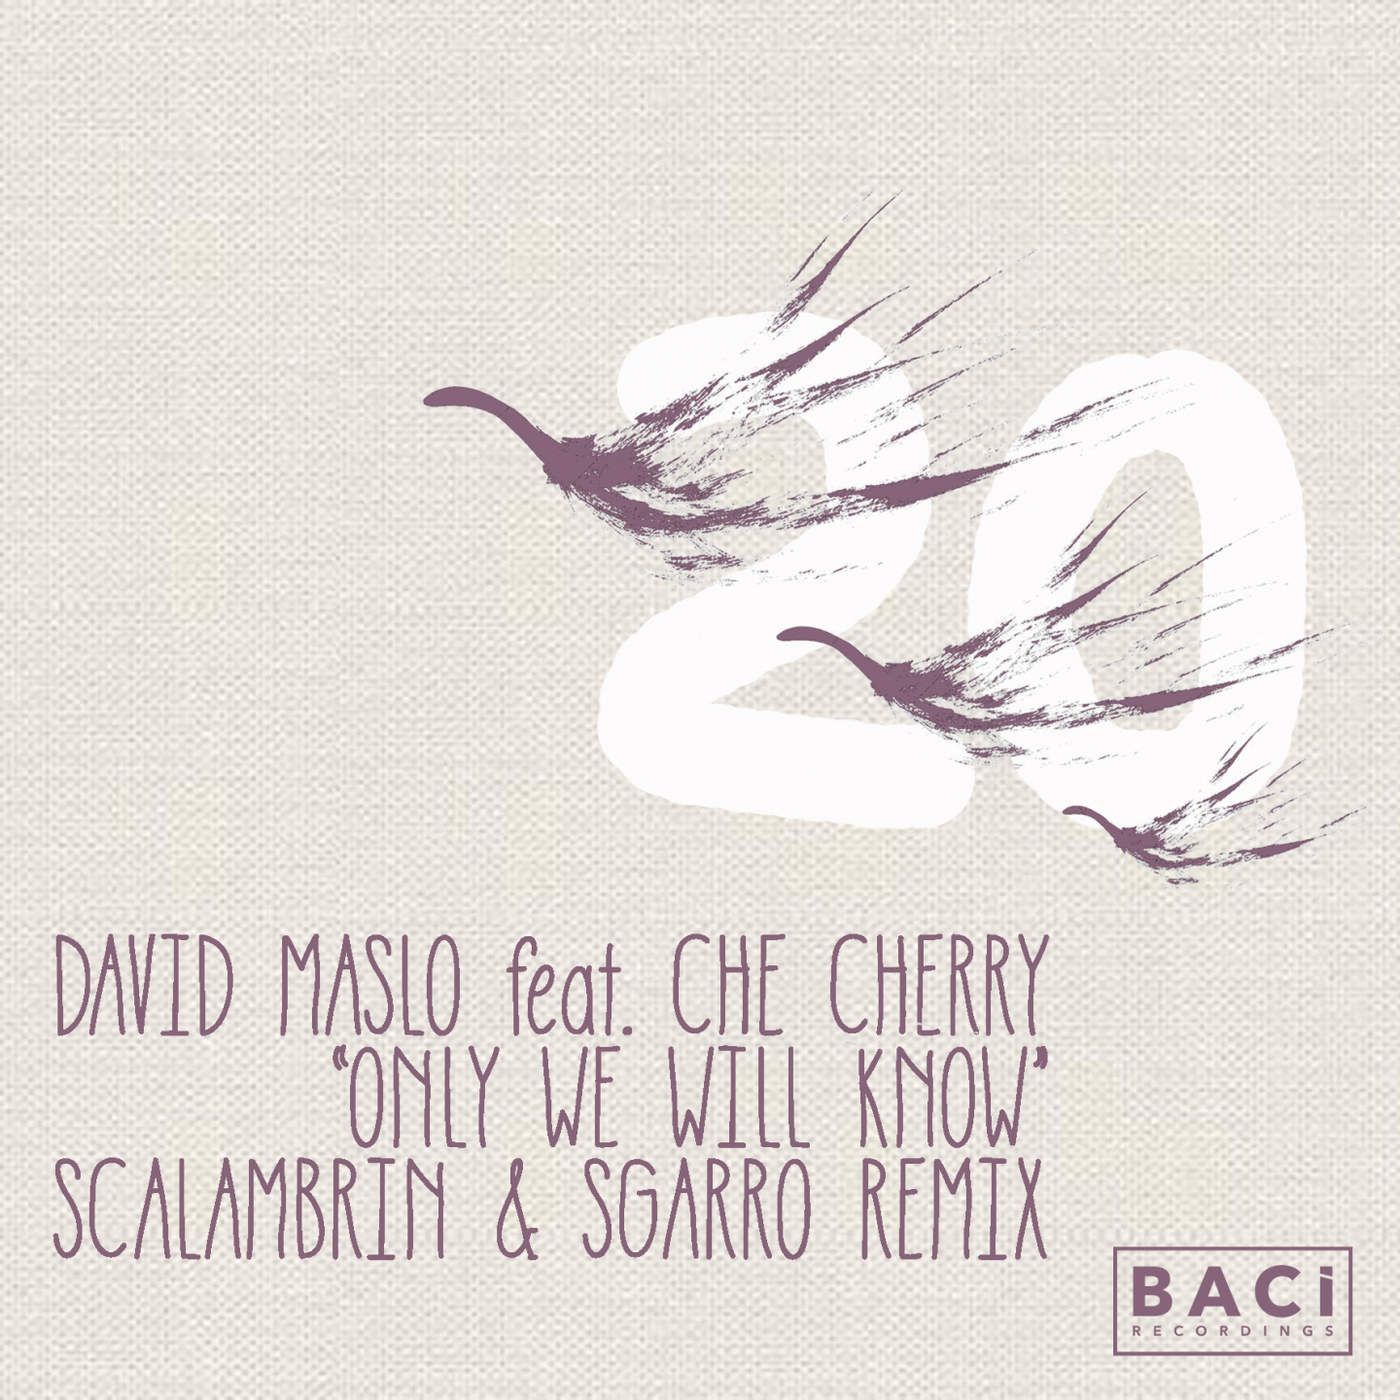 David Maslo Feat. Che Cherry – Only We Will Know (scalambrin And Sgarro Remix) on Revolution Radio